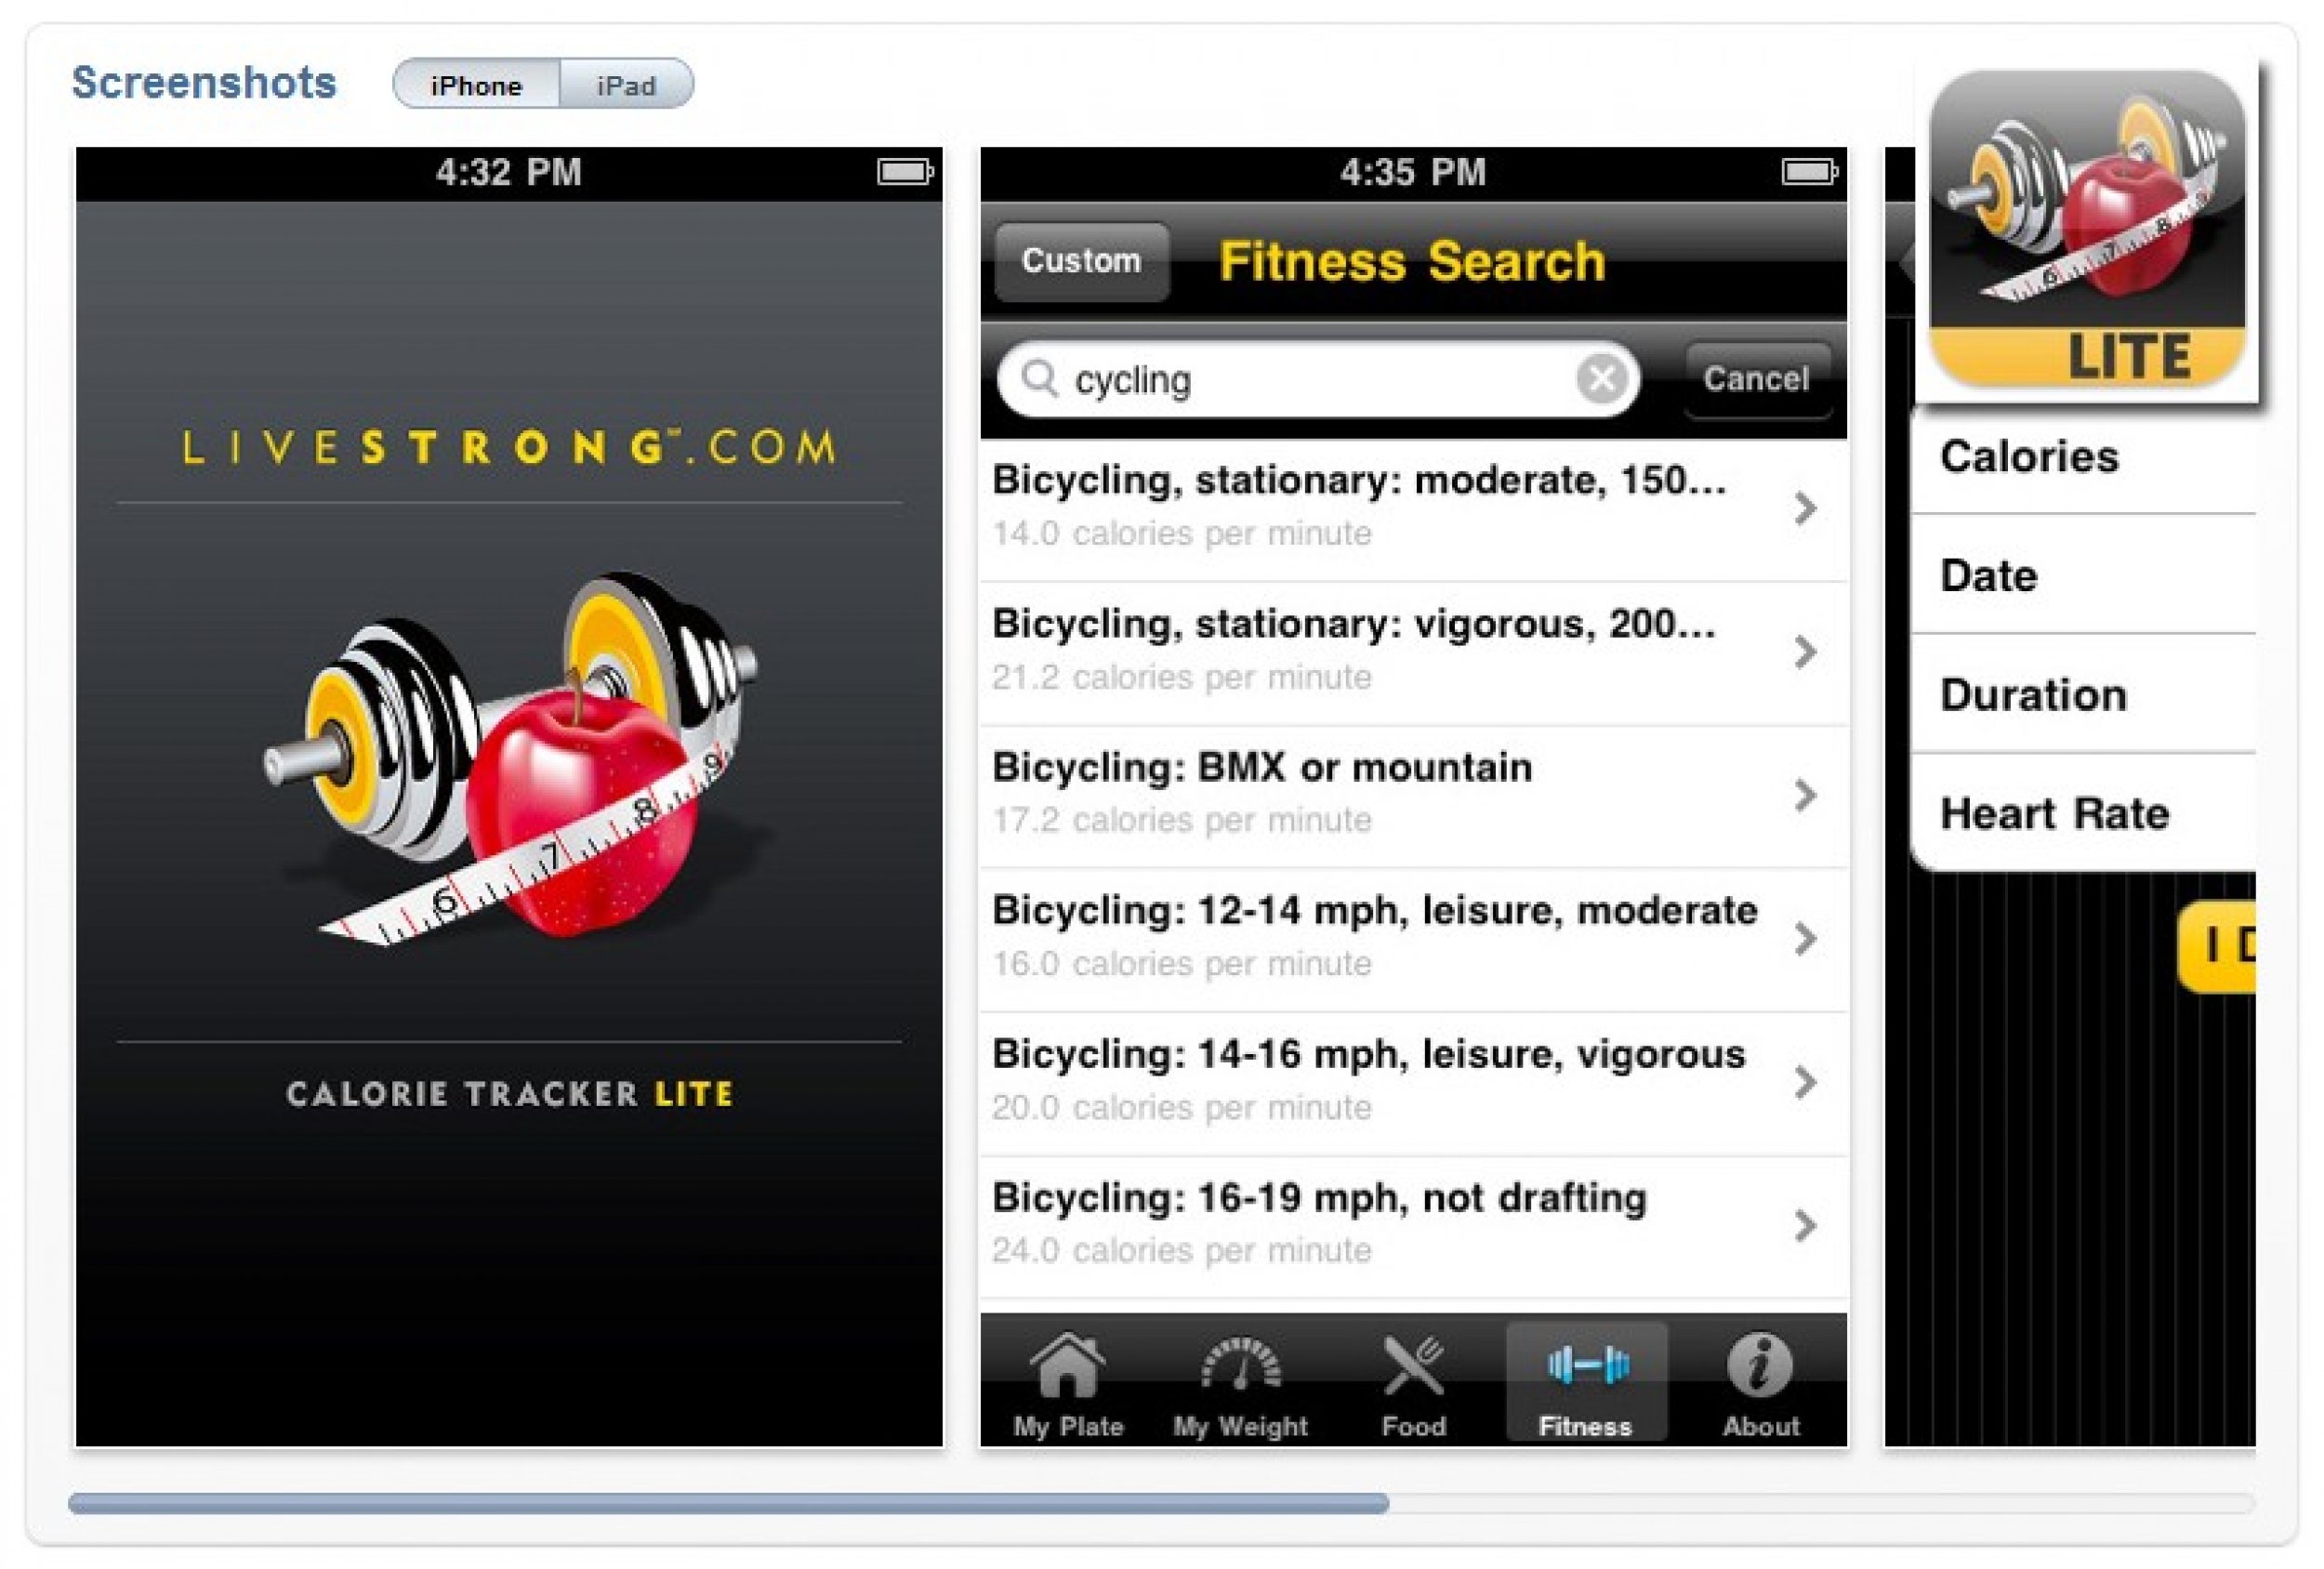 Calorie Tracker Healthcare  Fitness - Top 50 must-have iPad apps